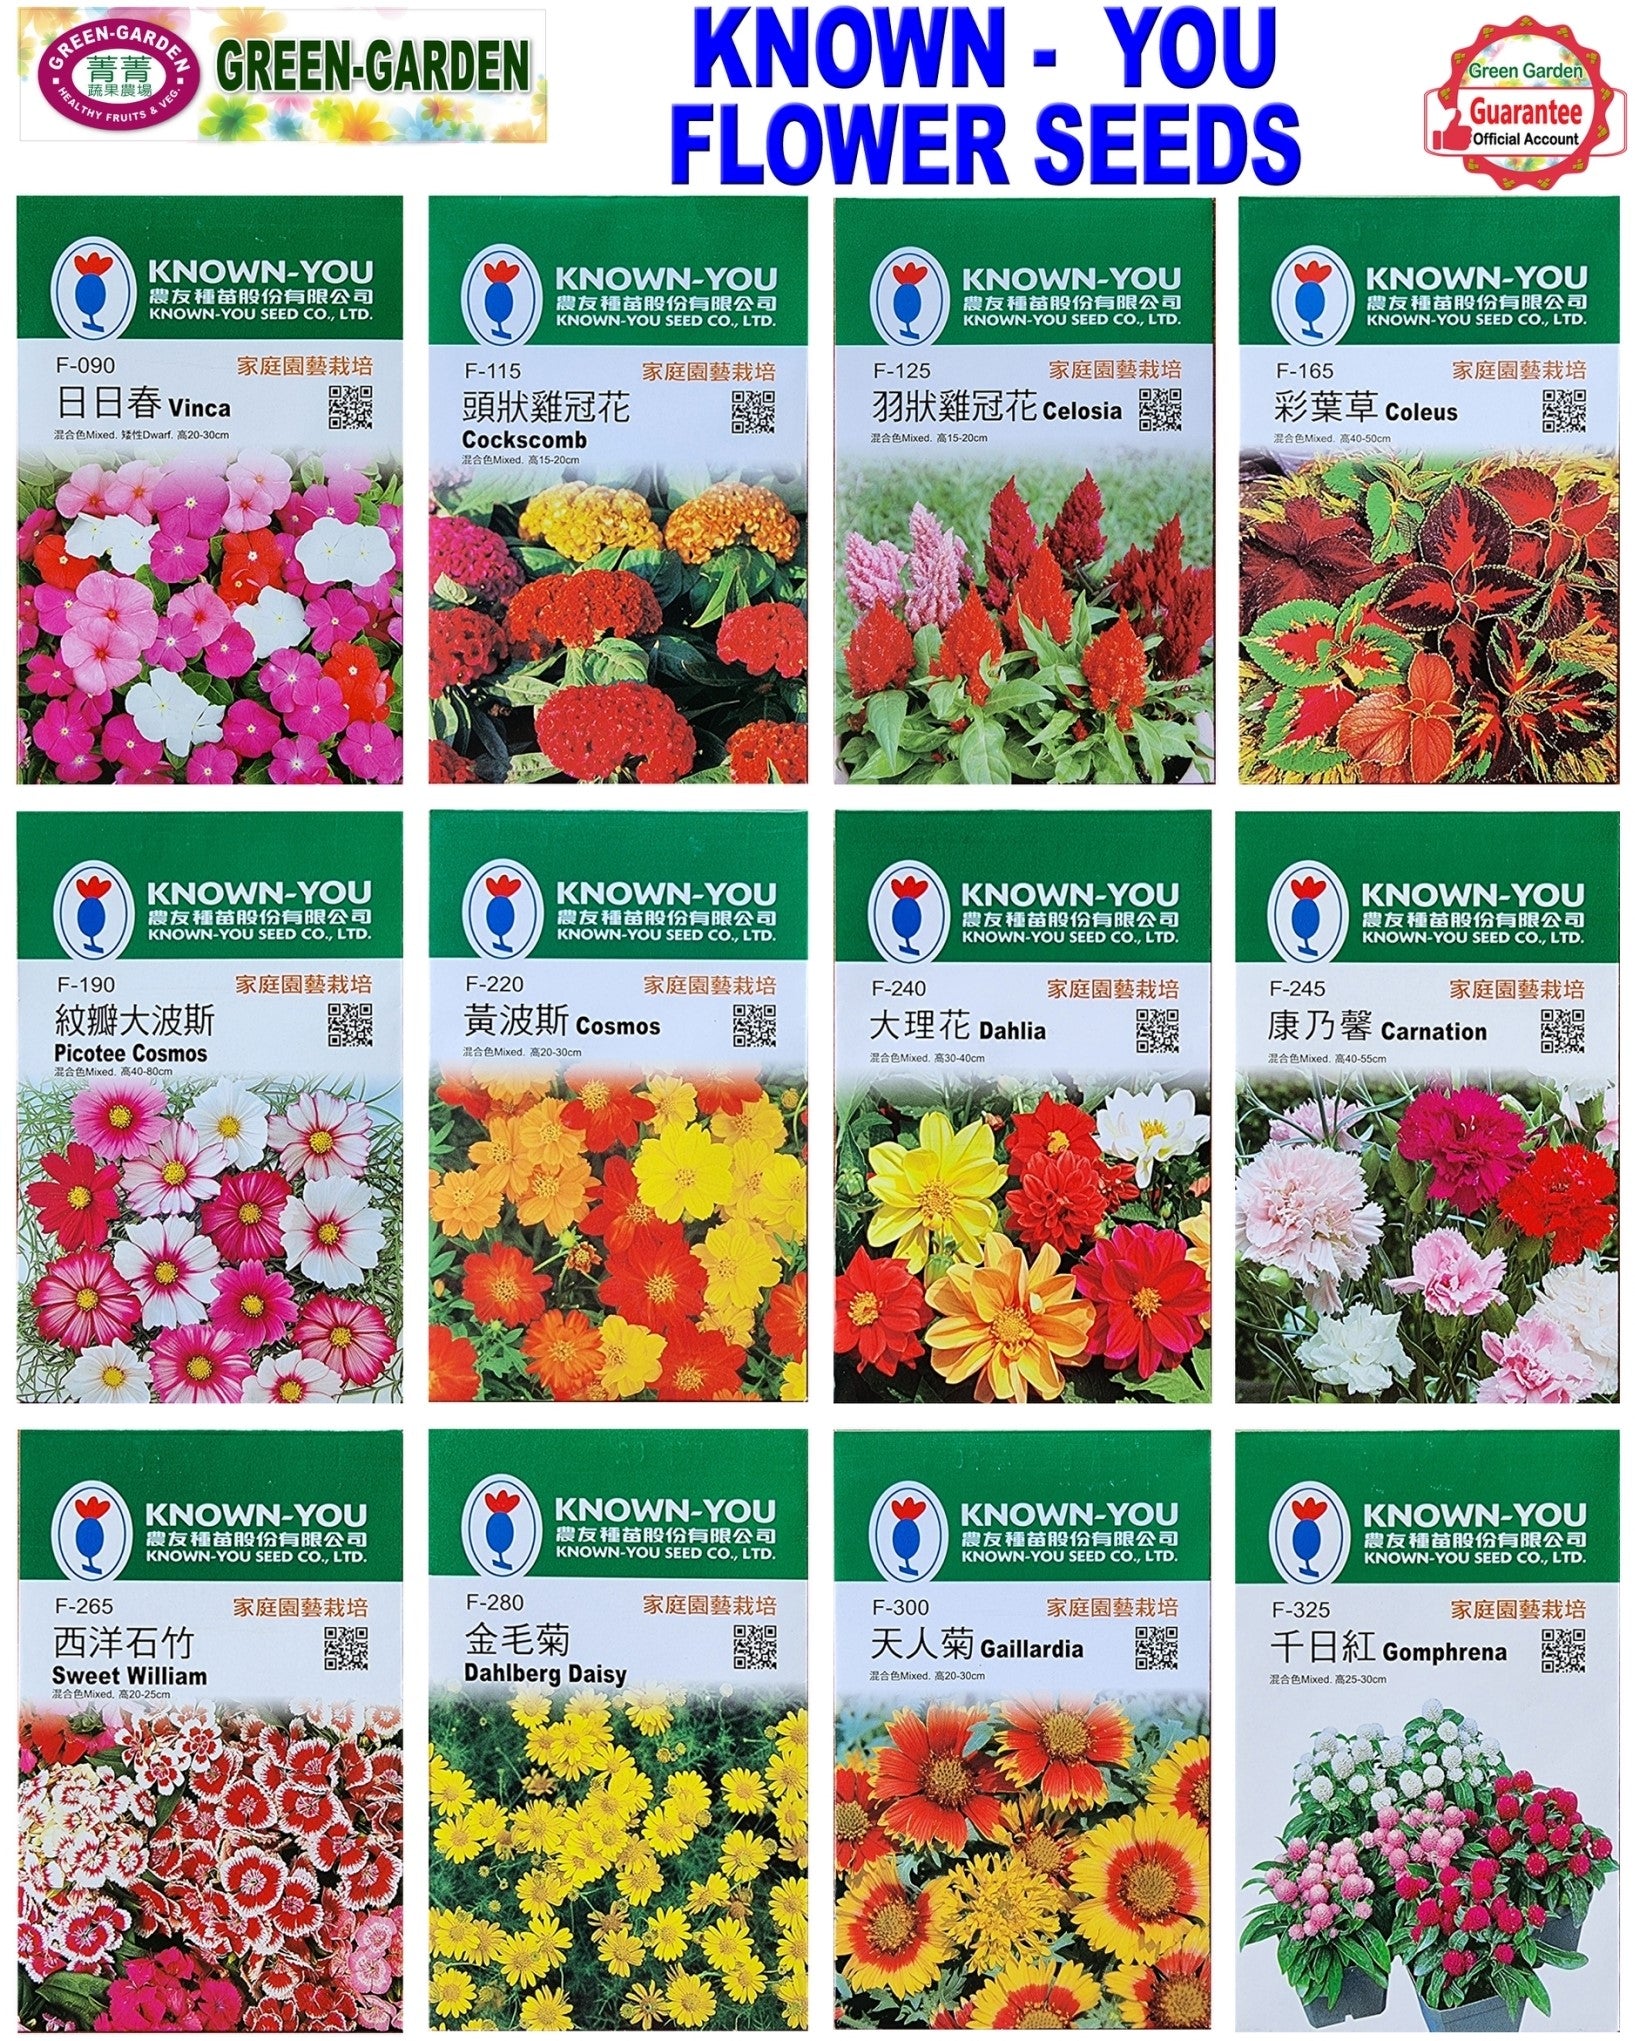 Known You Flower Seeds (F-125 Celosia)